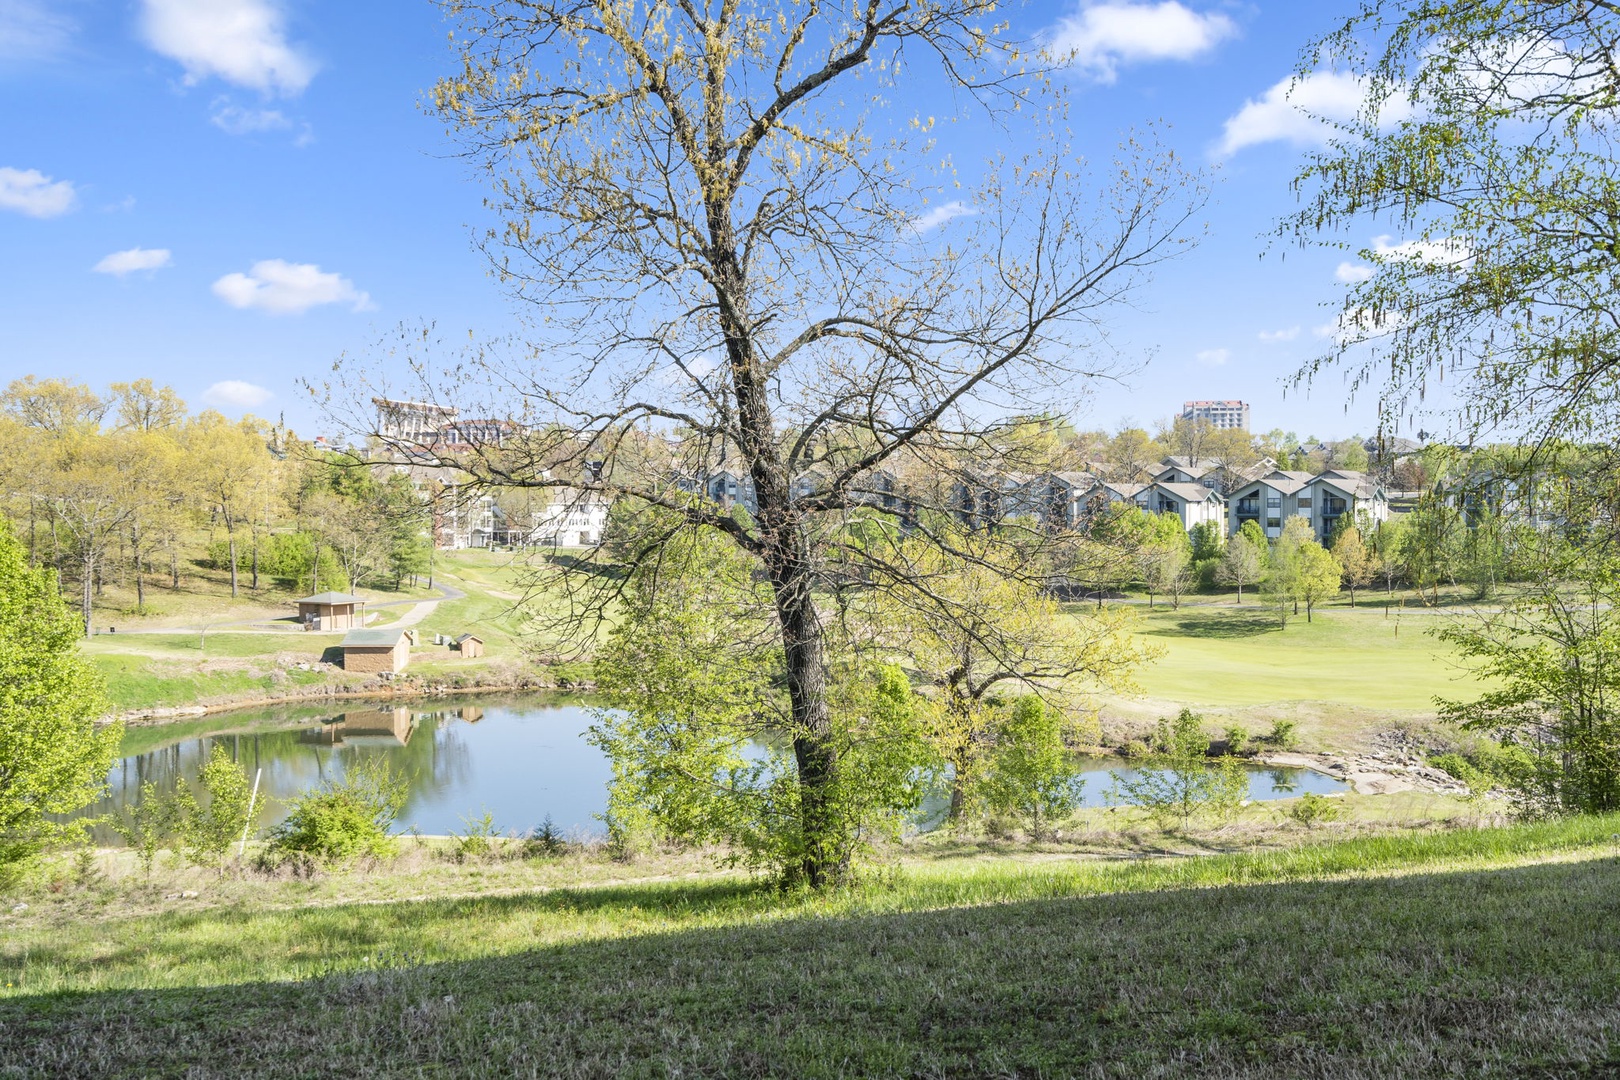 Enjoy tranquil views of rolling hills and a quaint pond from the covered patio